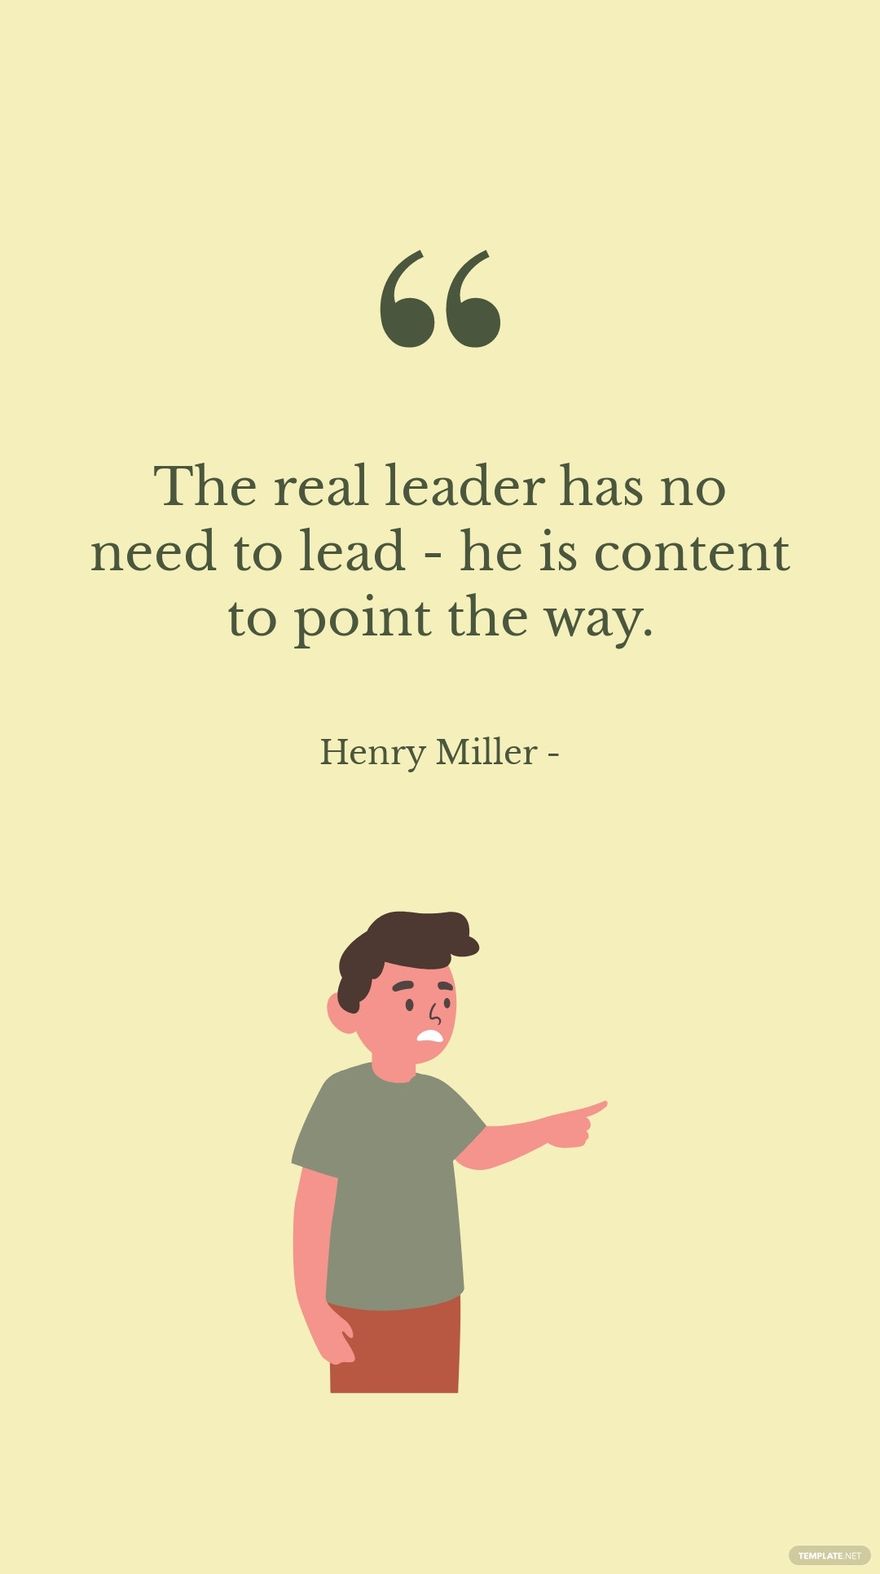 Henry Miller - The real leader has no need to lead - he is content to point the way.